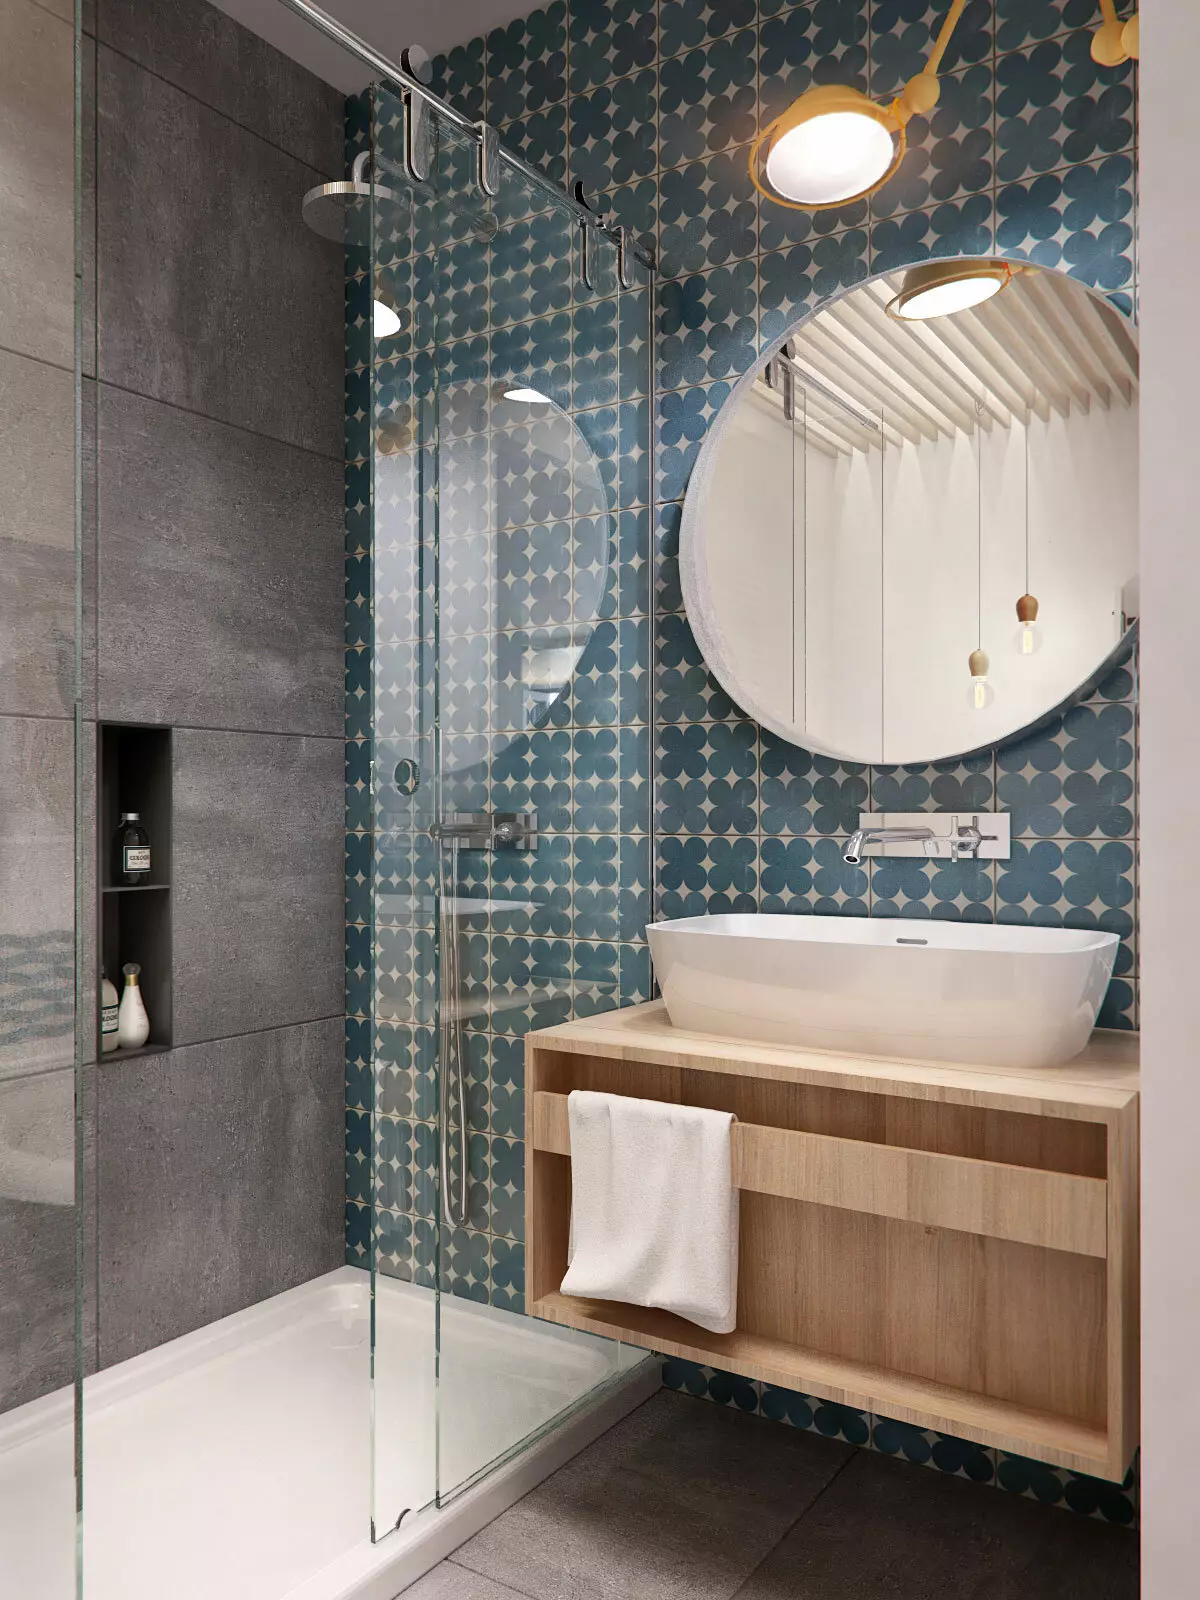 Bathroom design 4 square meters. M (97 photos): Modern interior designs of a small room 4 square meters, planning ideas 10139_19